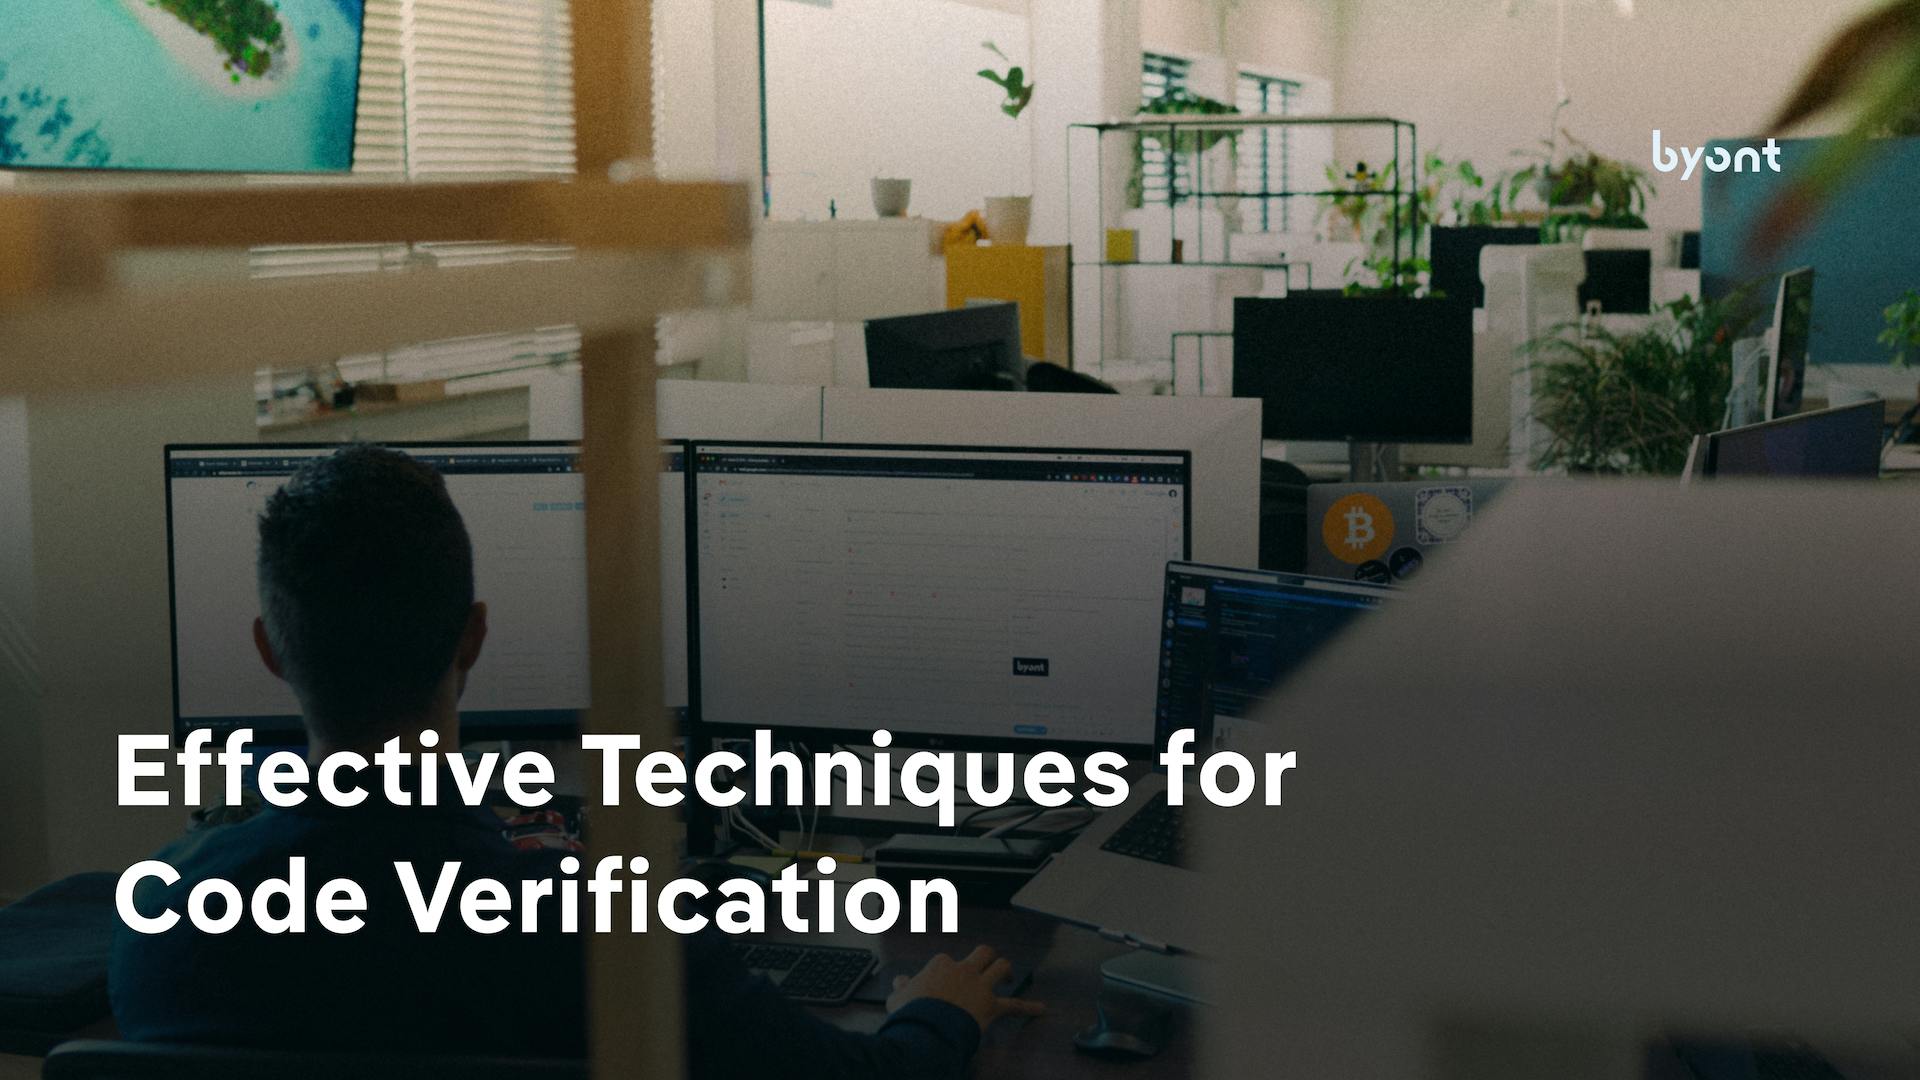 Effective Techniques for Code Verification: A Look at Unit Testing, Fuzzing, SMT, Static Analysis, and more